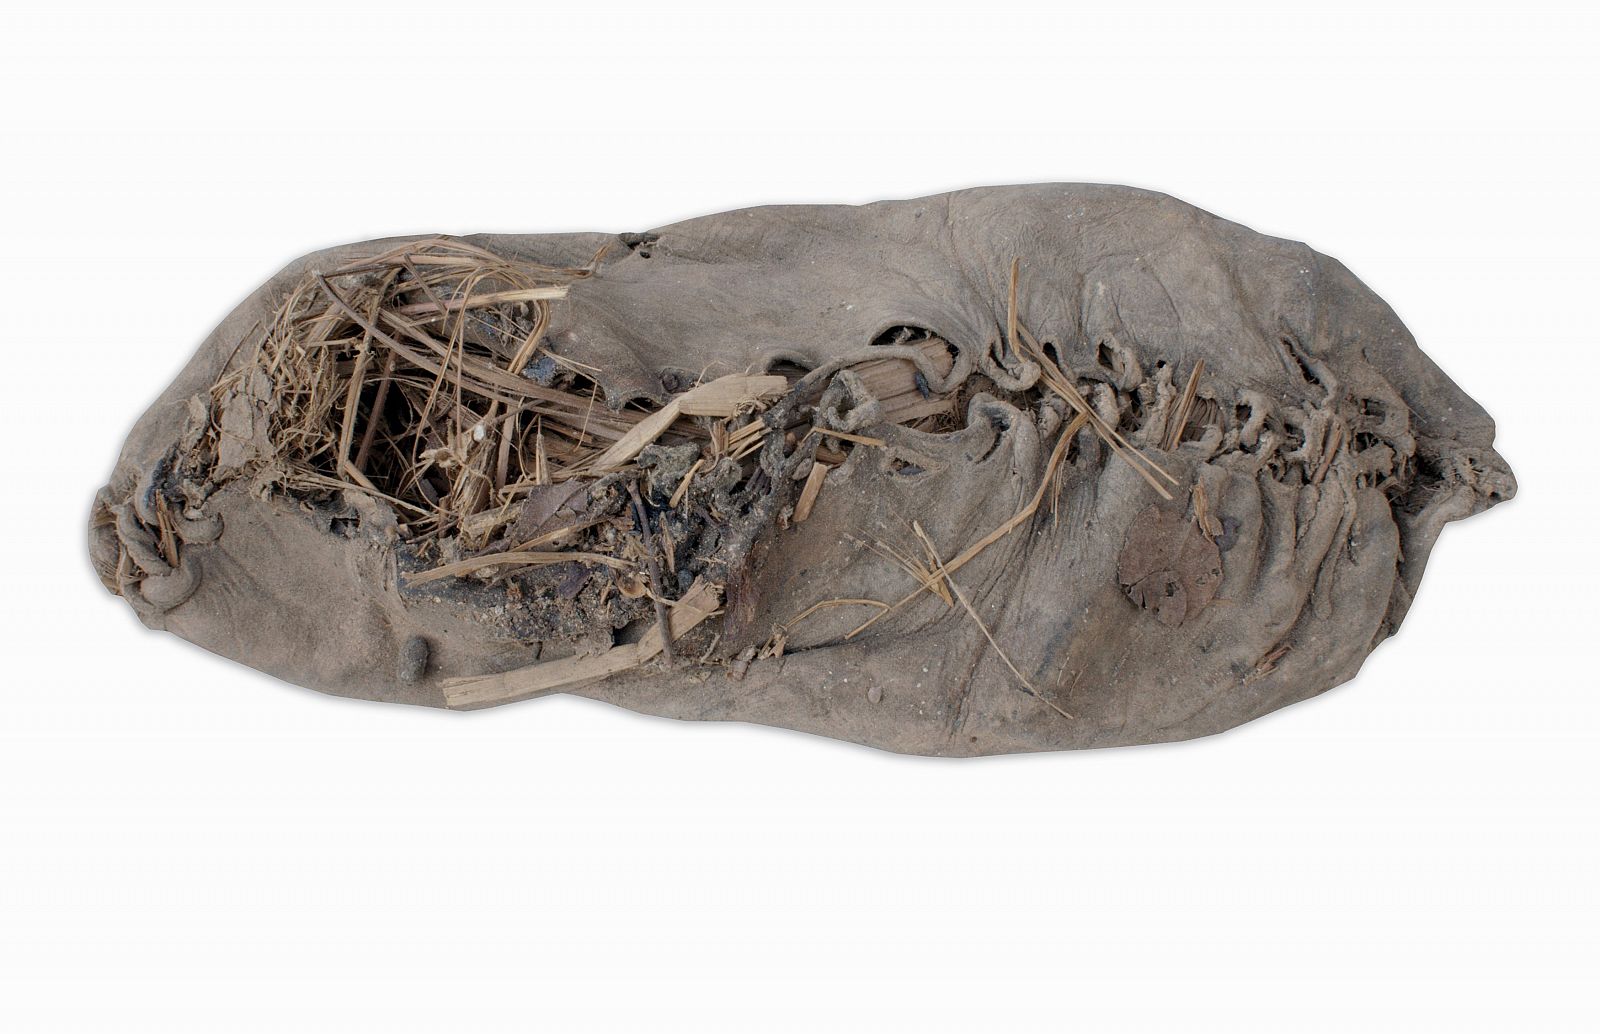 What is thought to be the world's oldest shoe is seen in a photo released after its discovery by an archaeology team from University College Cork